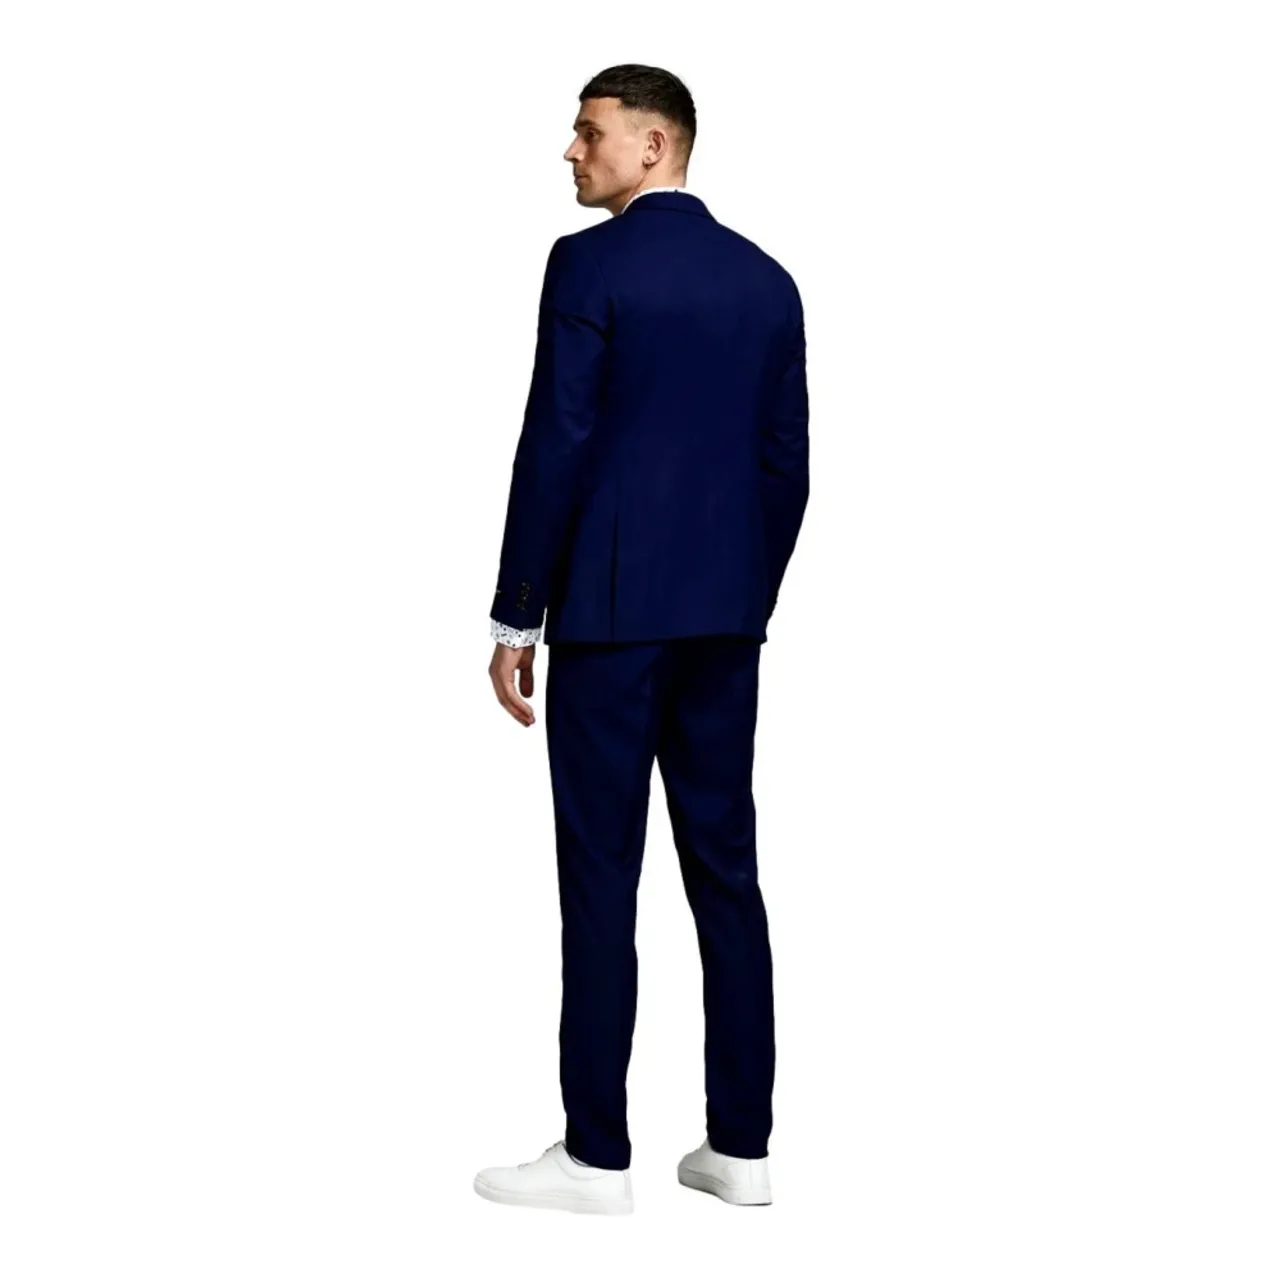 Jack & Jones , Single Breasted Suits ,Blue male, Sizes: